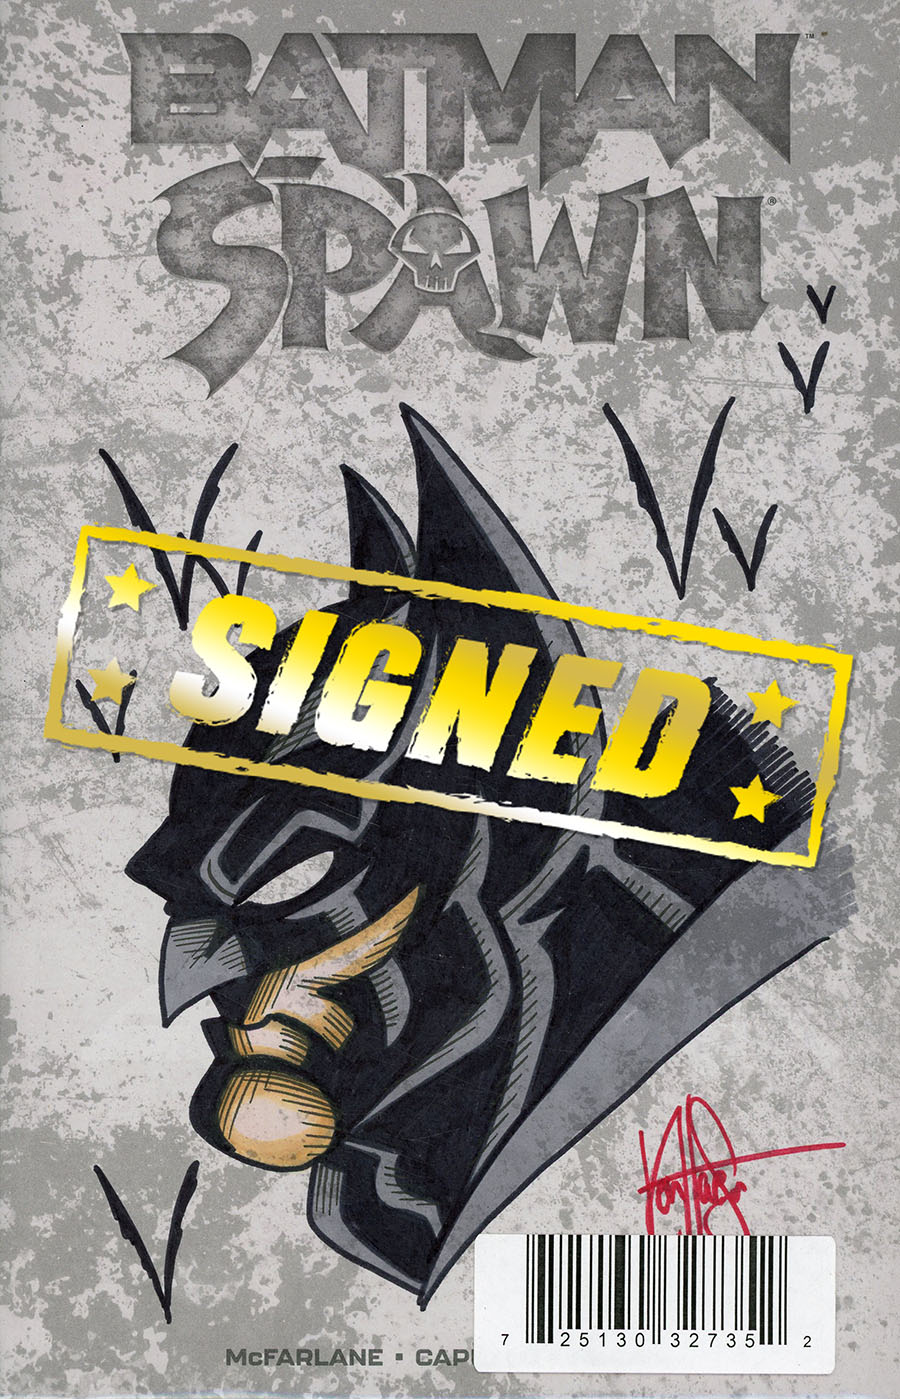 Batman Spawn #1 (One Shot) Cover Z DF Variant Blank Commissioned Cover Art Signed & Remarked By Ken Haeser With A Batman Hand-Drawn Sketch